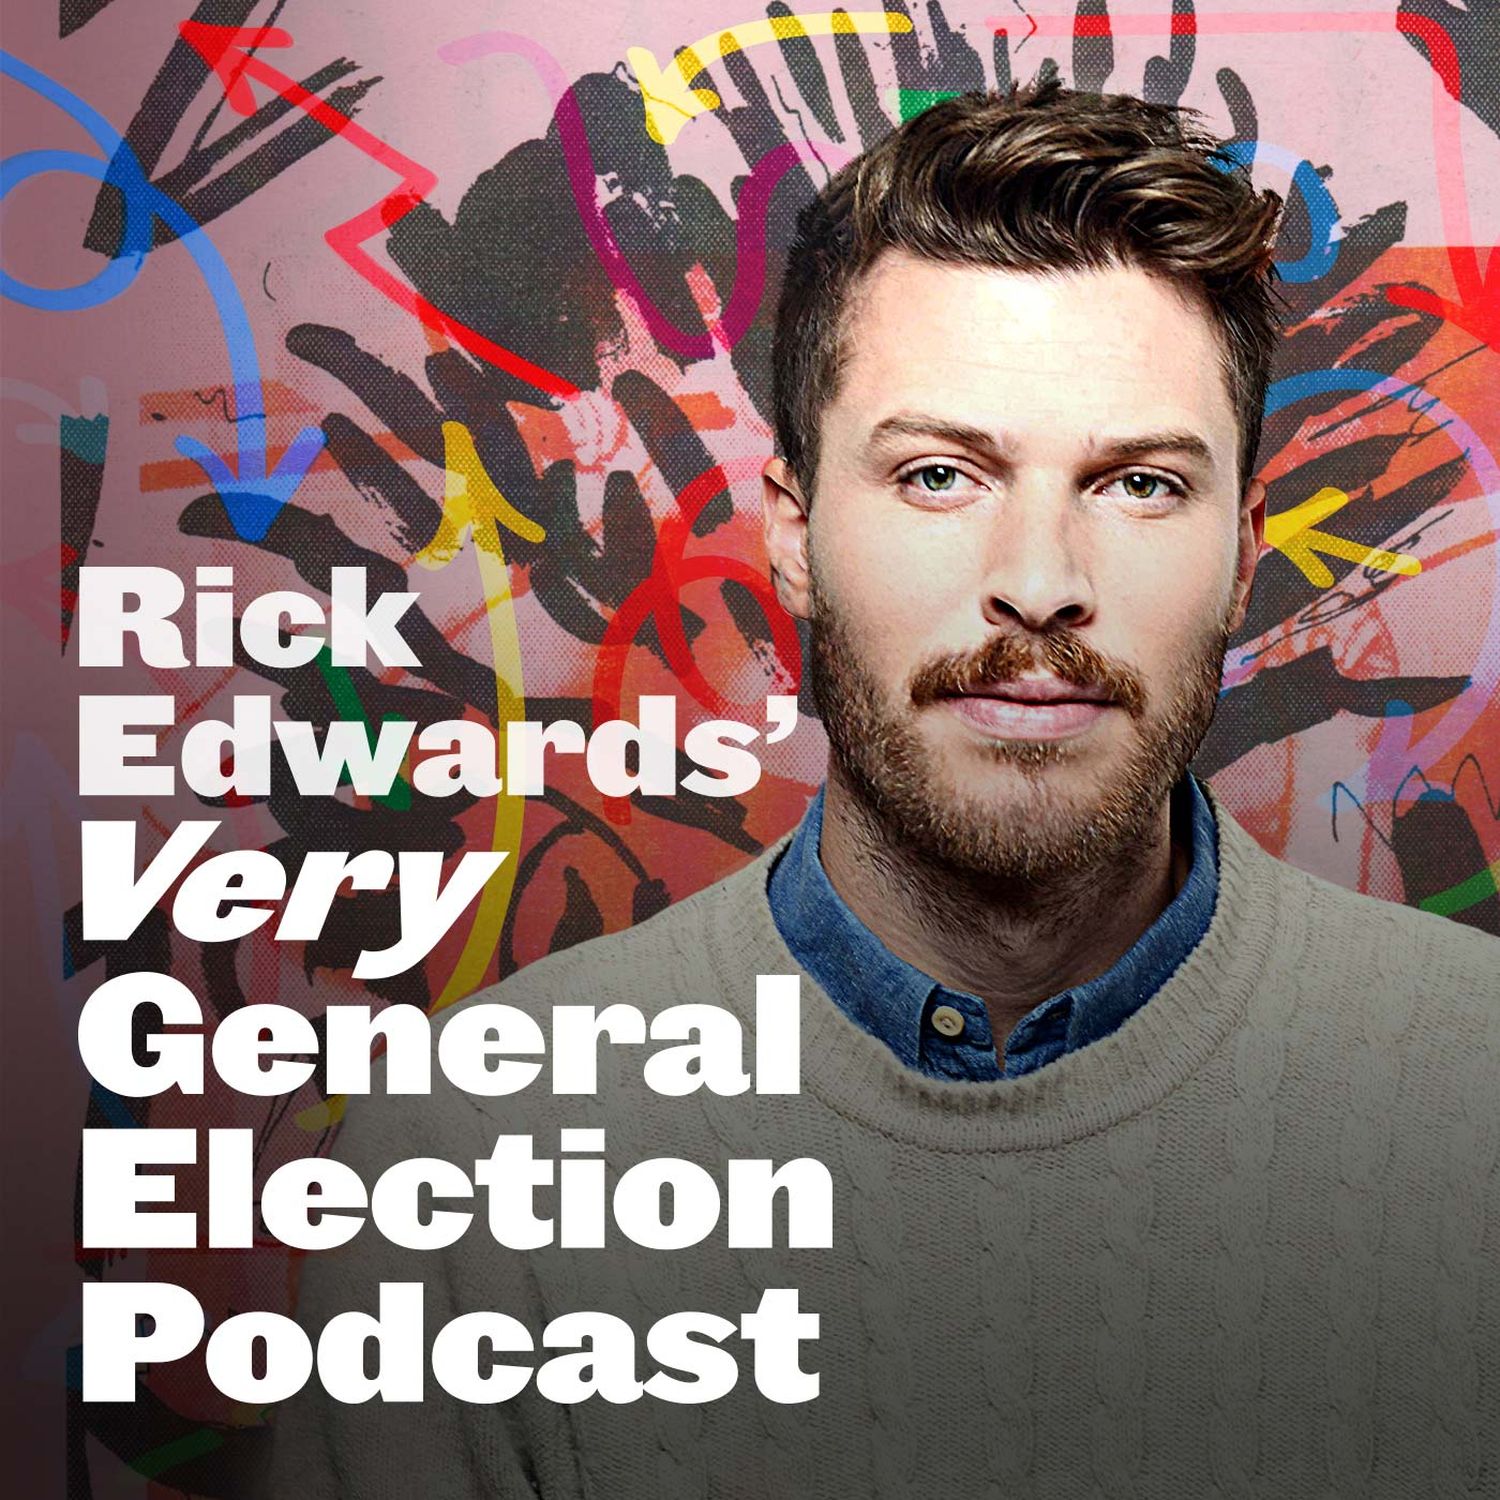 Rick Edwards Very General Election Podcast